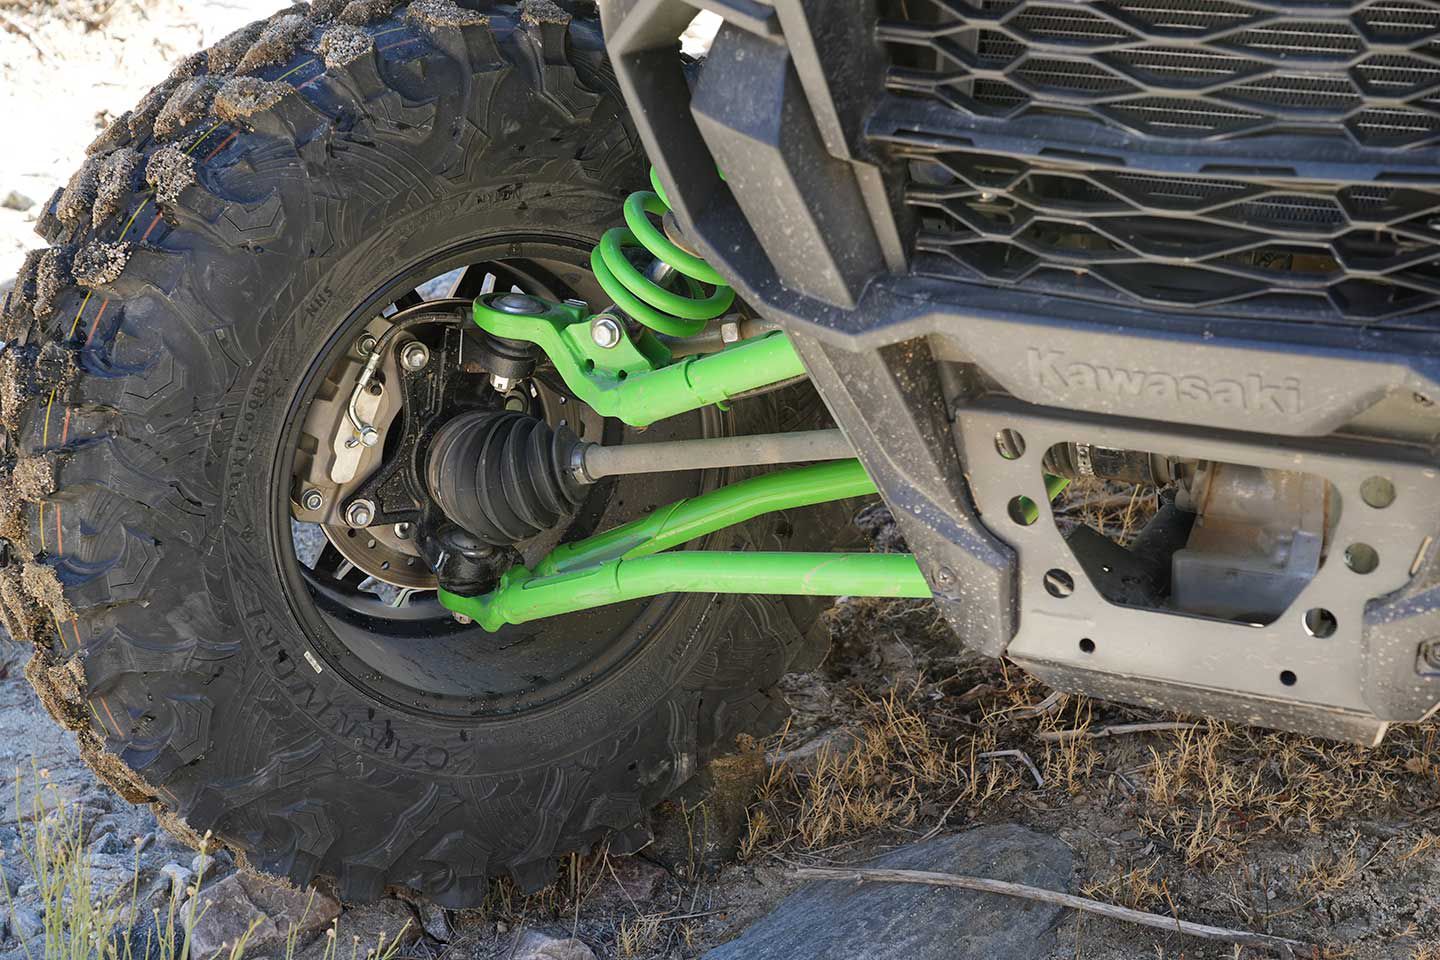 The 2023 Kawasaki Teryx KRX 1000 rolls on 15-inch rims shod with meaty 31-inch tires. Four-wheel disc brakes with stainless-steel brake lines keep speed in check.